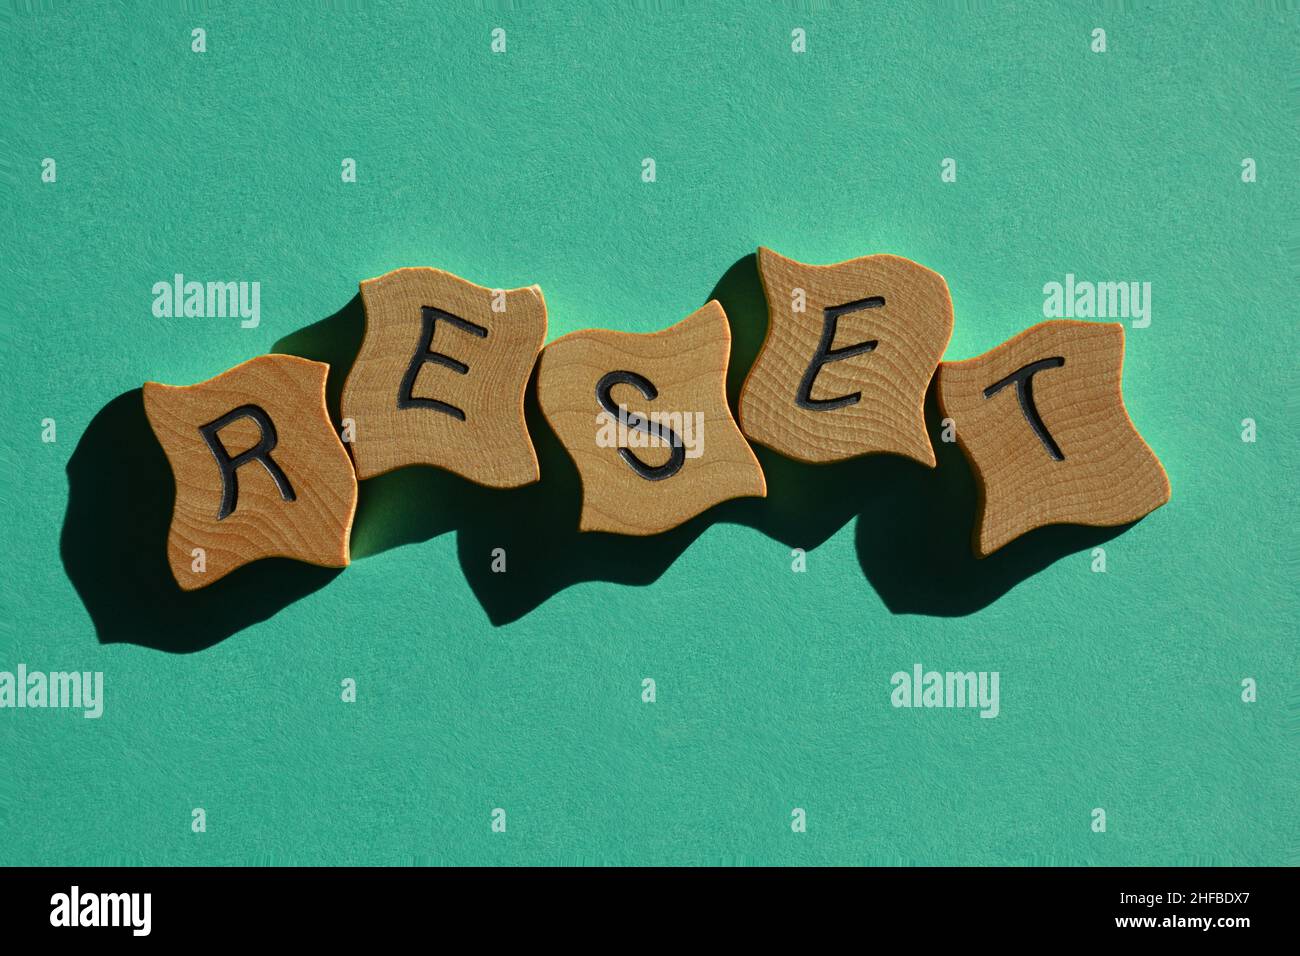 Reset, word in wooden alphabet letters isolated on bright green background Stock Photo